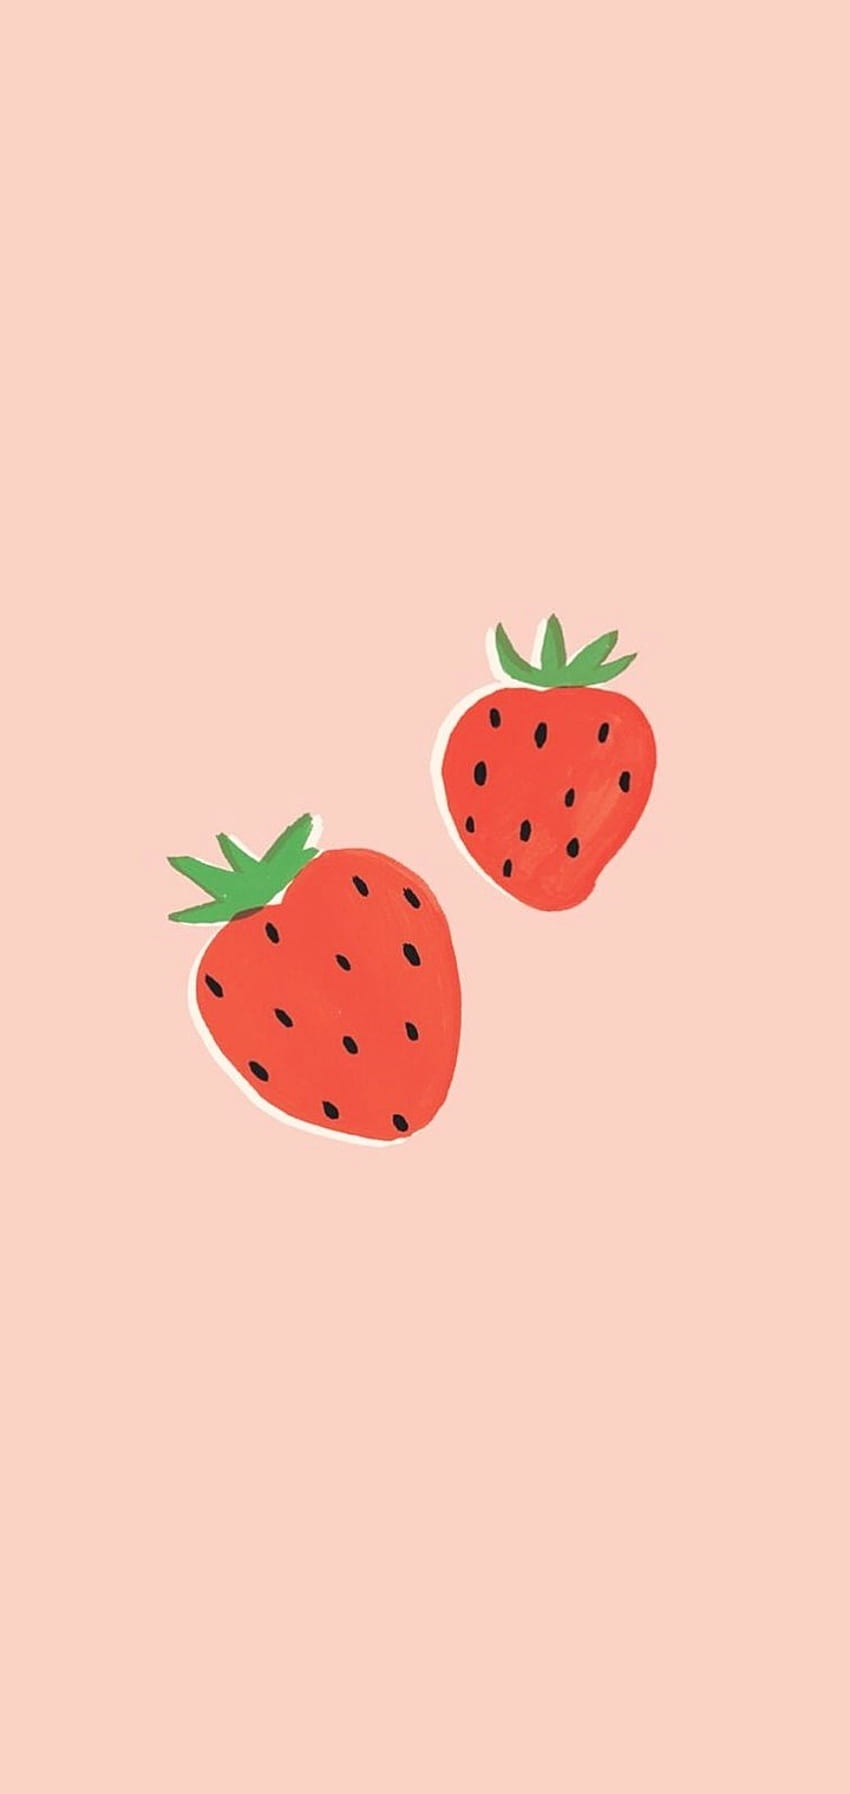 Two strawberries on a pink background - Strawberry, fruit